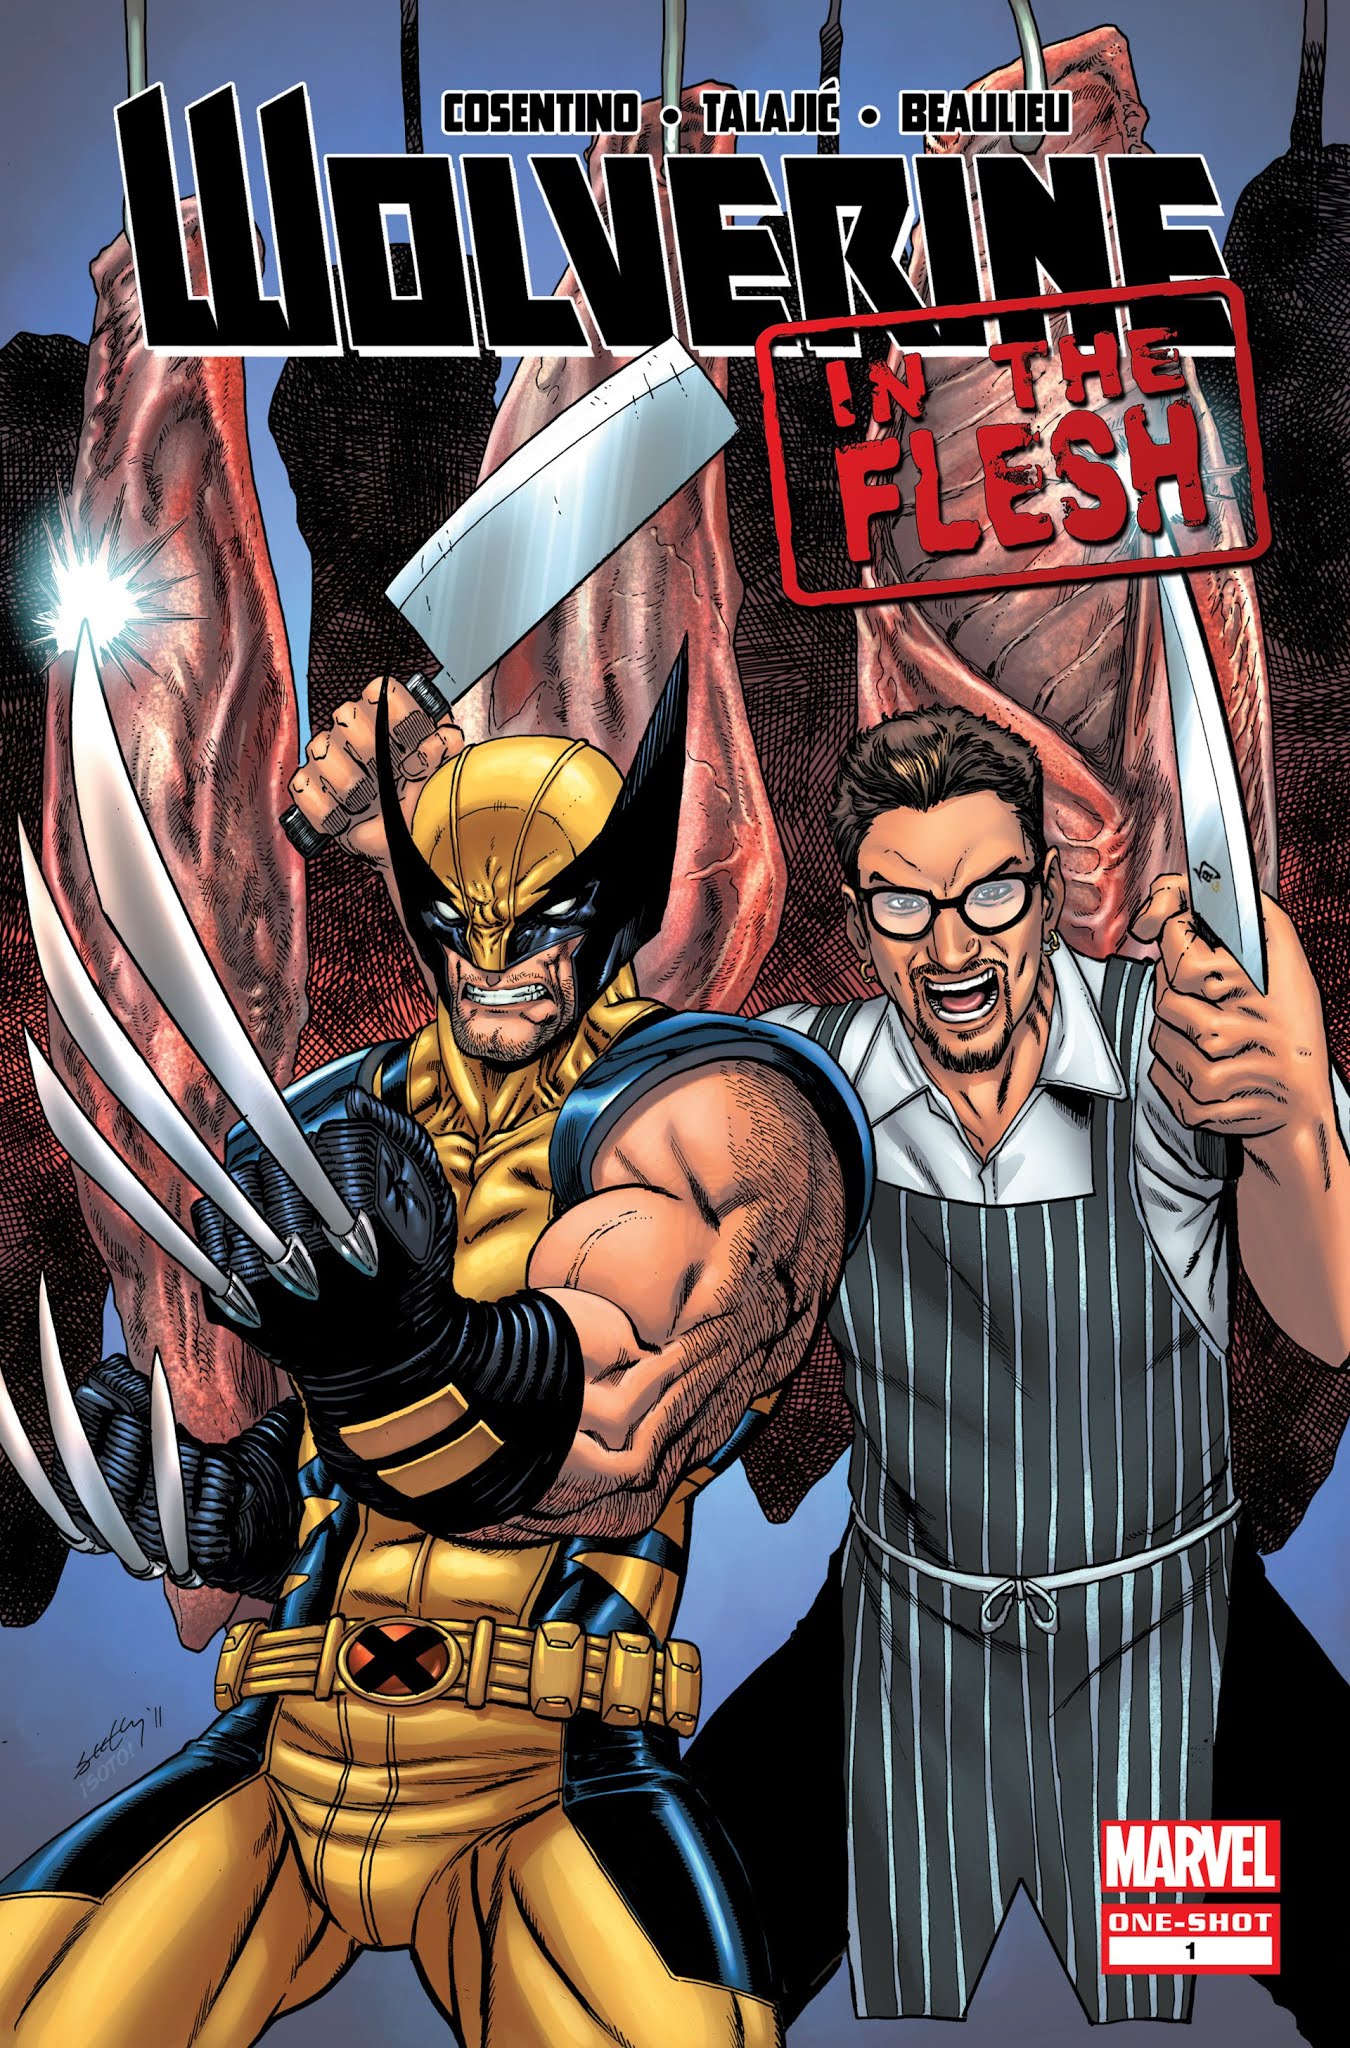 Read online Wolverine: In the Flesh comic -  Issue # Full - 1